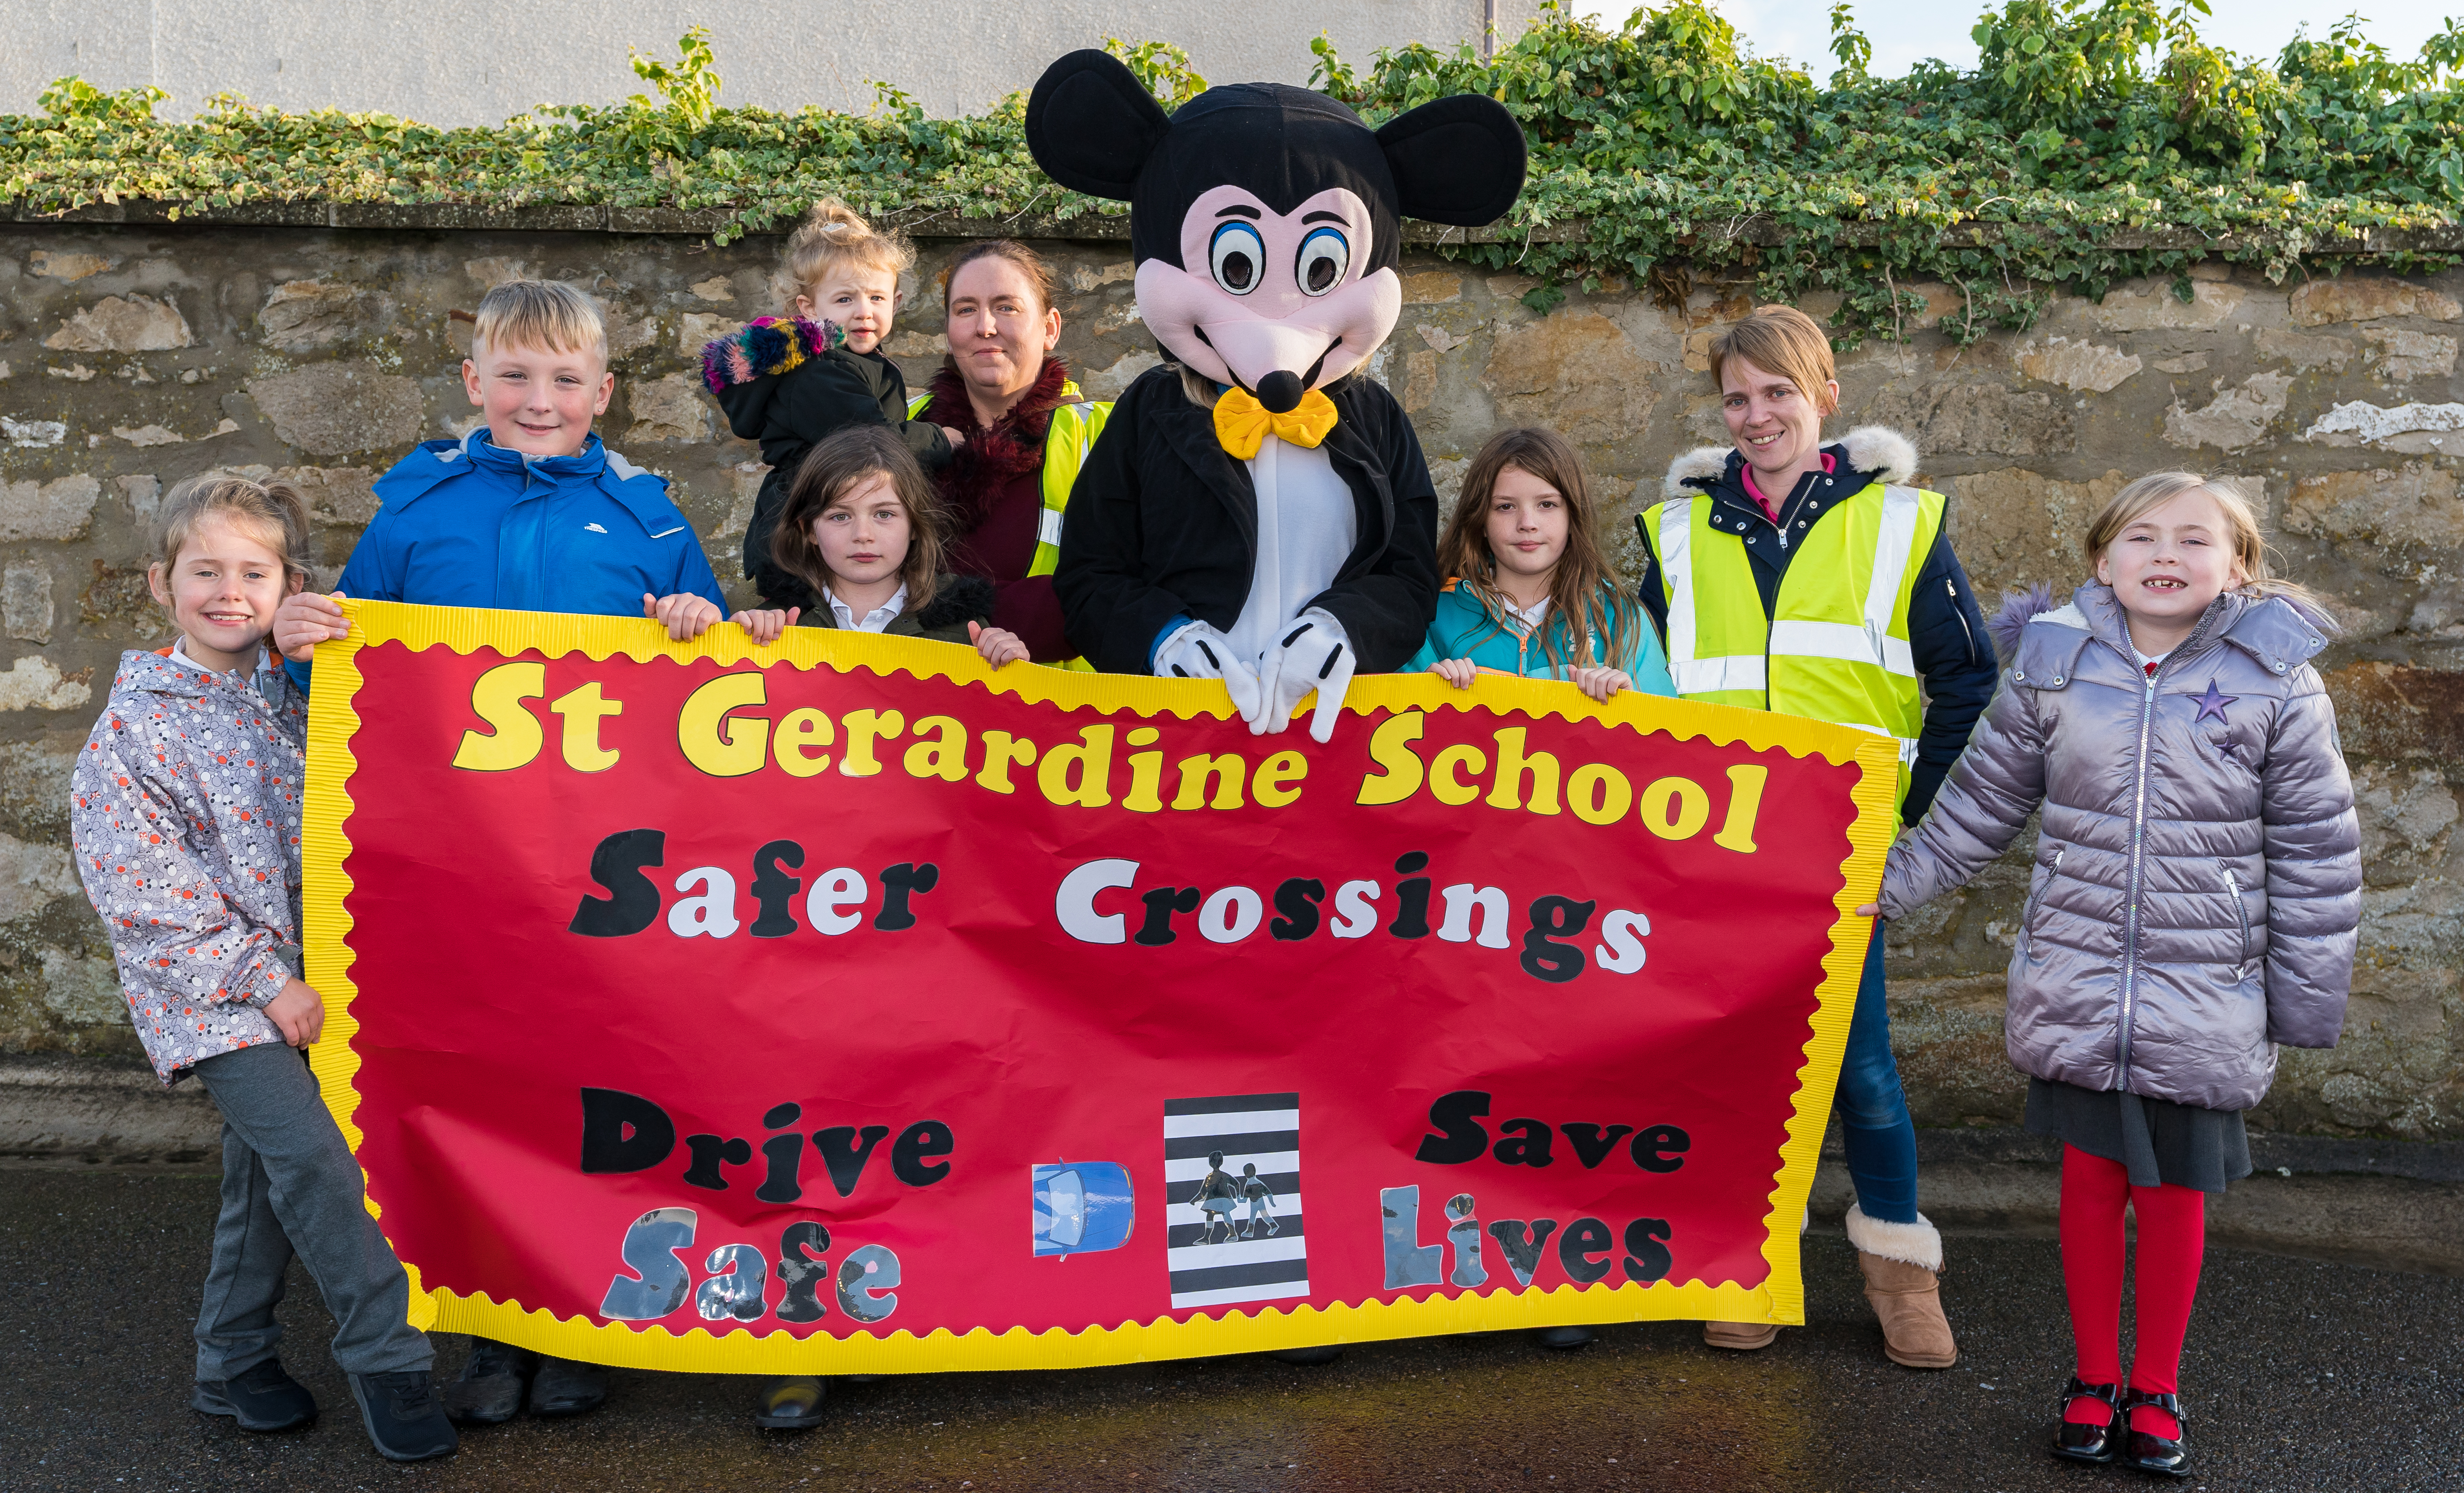 Last October Lossiemouth Community Council bid to collect pennies to make up a mile relative to Safer Crossings with P4 pupils of St Gerardines School. L- R - Flo Selllar, Mathew Simpson, Phoebe Cannon, Louise McBride with her daughter, Carolle Ralph as Mickey, Charlotte Stewart, Kirsty Middleton and Taylor Murray